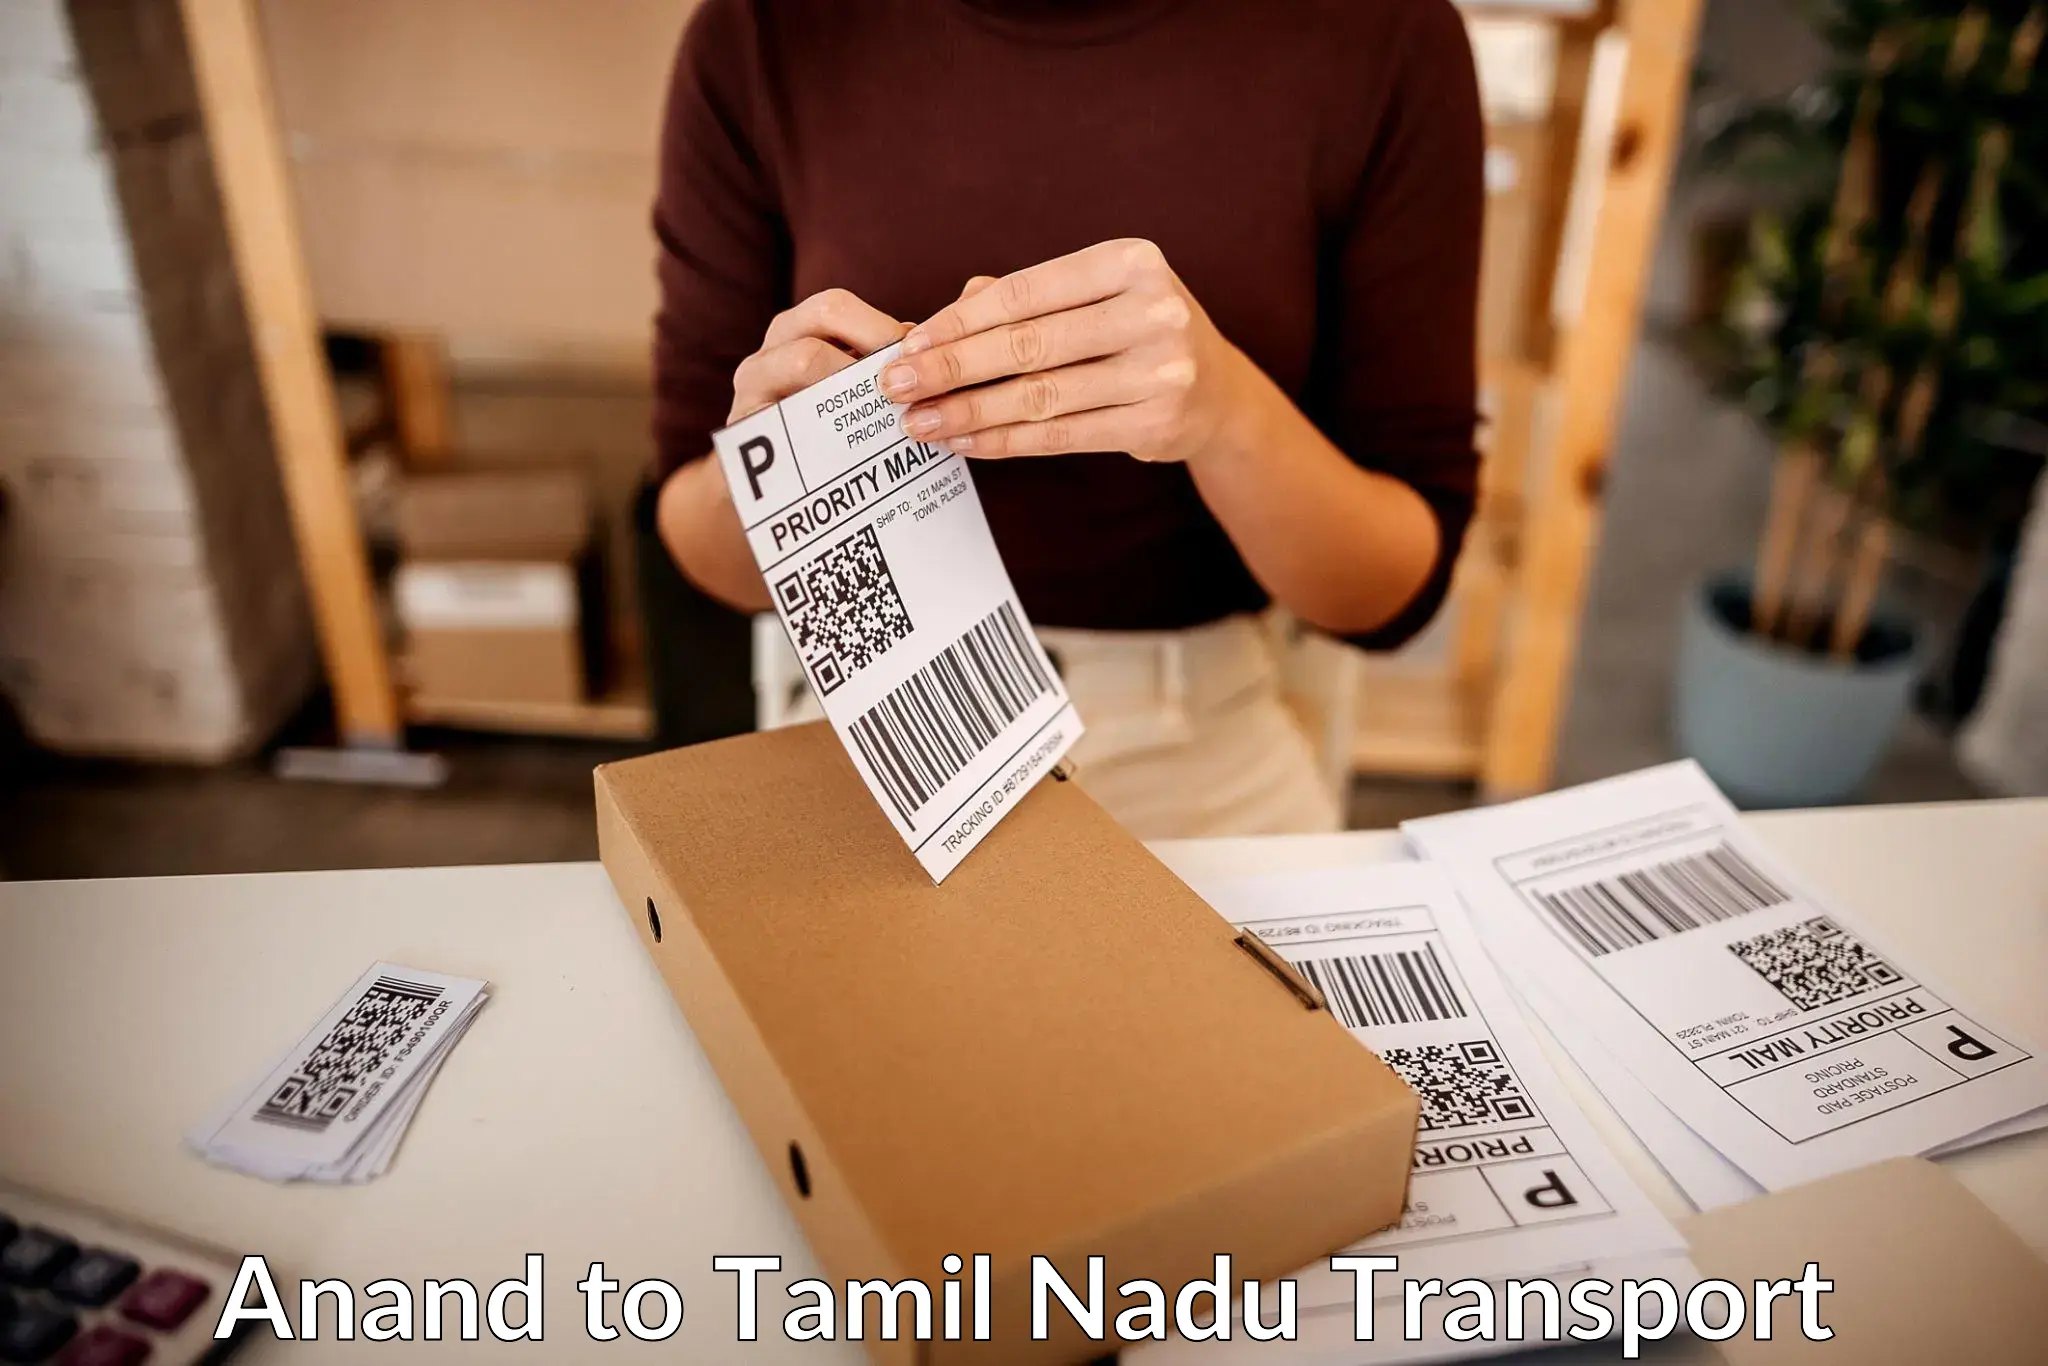 Air cargo transport services in Anand to Tamil Nadu